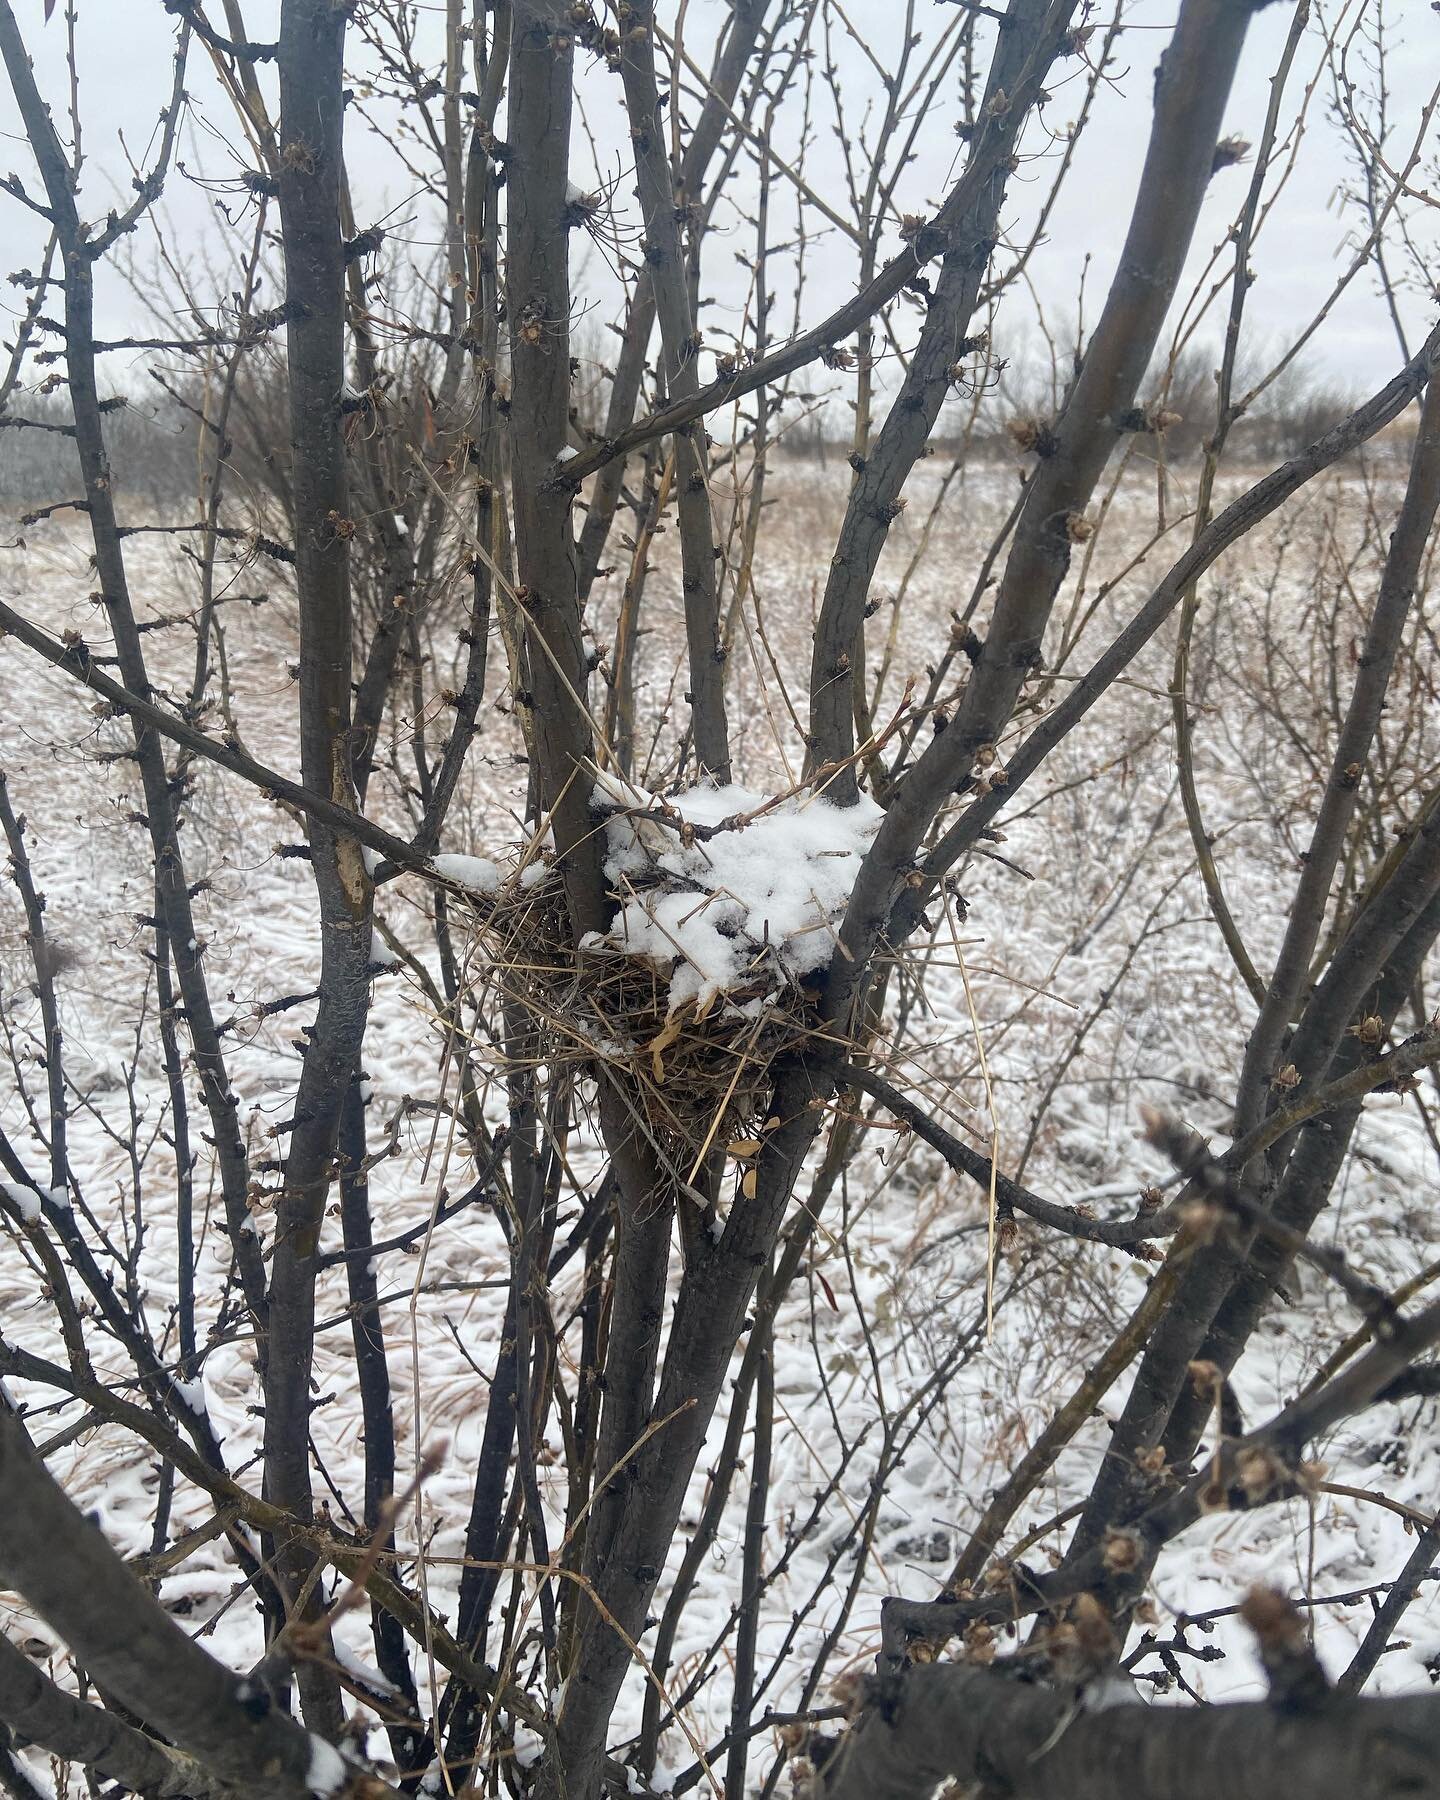 It's the first snow of the year, and Hawksley Workman isn't the only one singing. It's the perfect day to take kids on a nature walk and find all the bird nests hiding in your neighborhood and parks.

#outdoorlearningwithkids #firstsnowoftheyear #sno